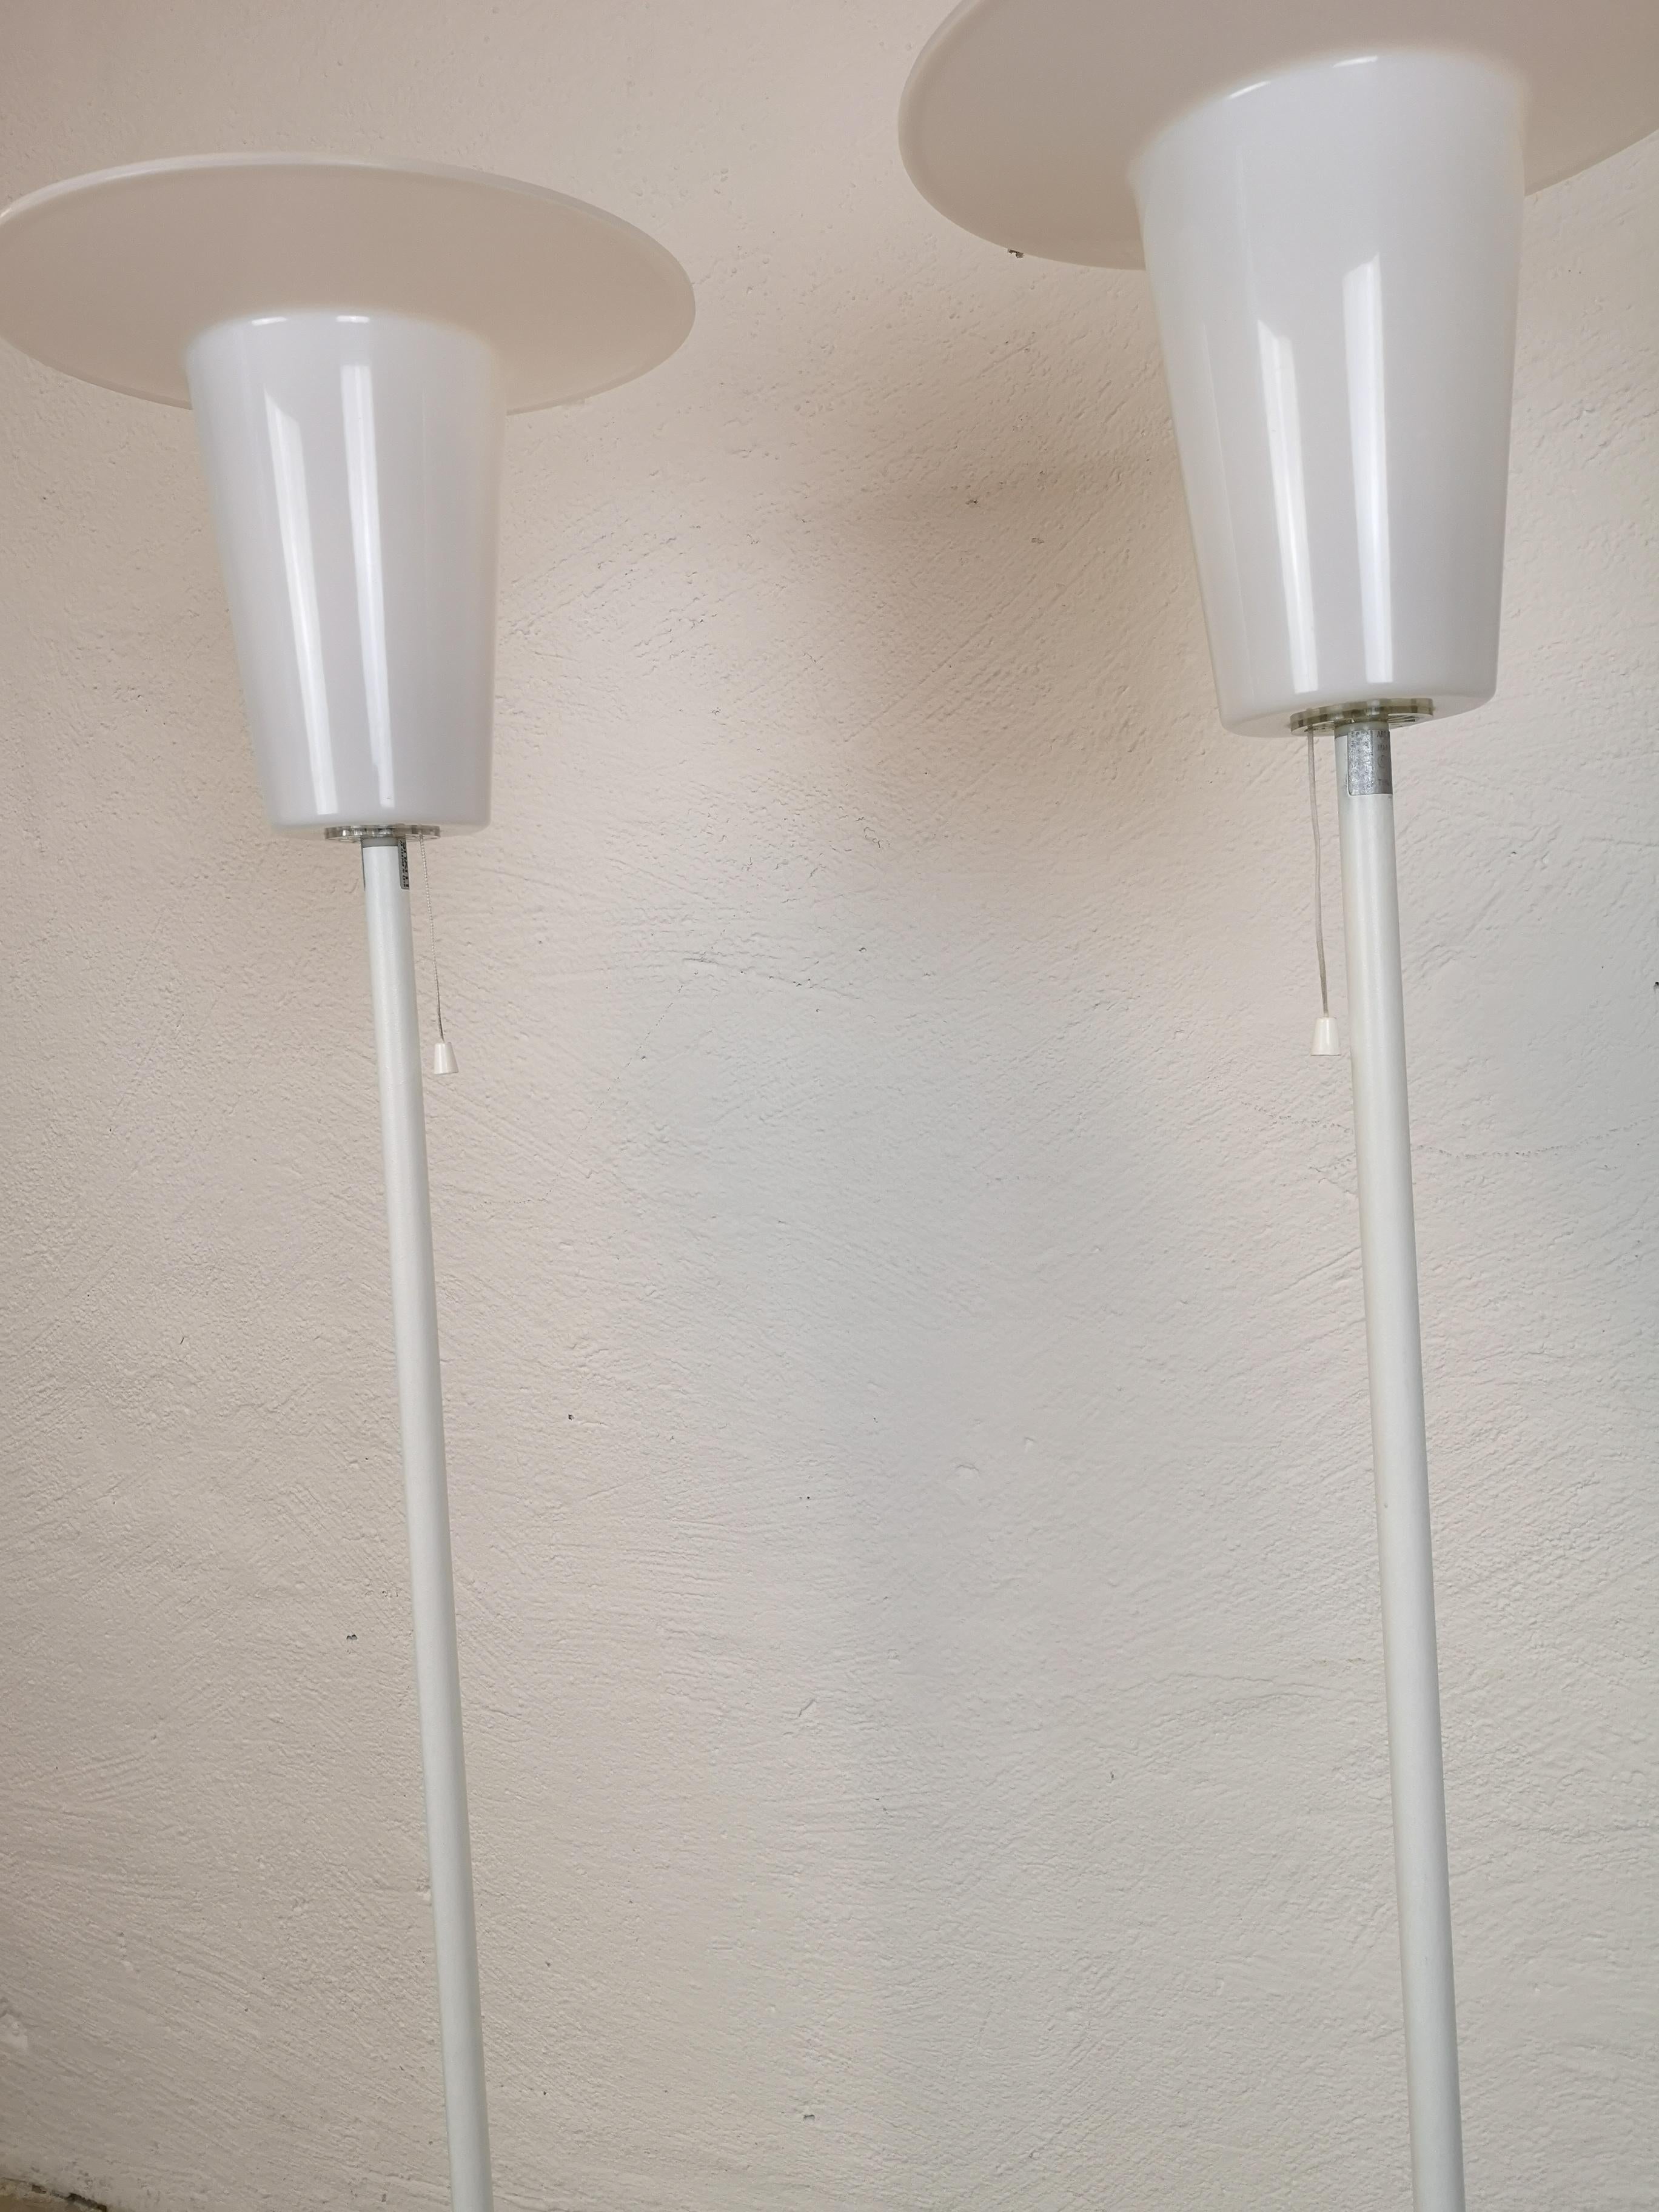 Late 20th Century Midcentury Modern Pair of Floor Lamps Luxus, Sweden, 1970s For Sale